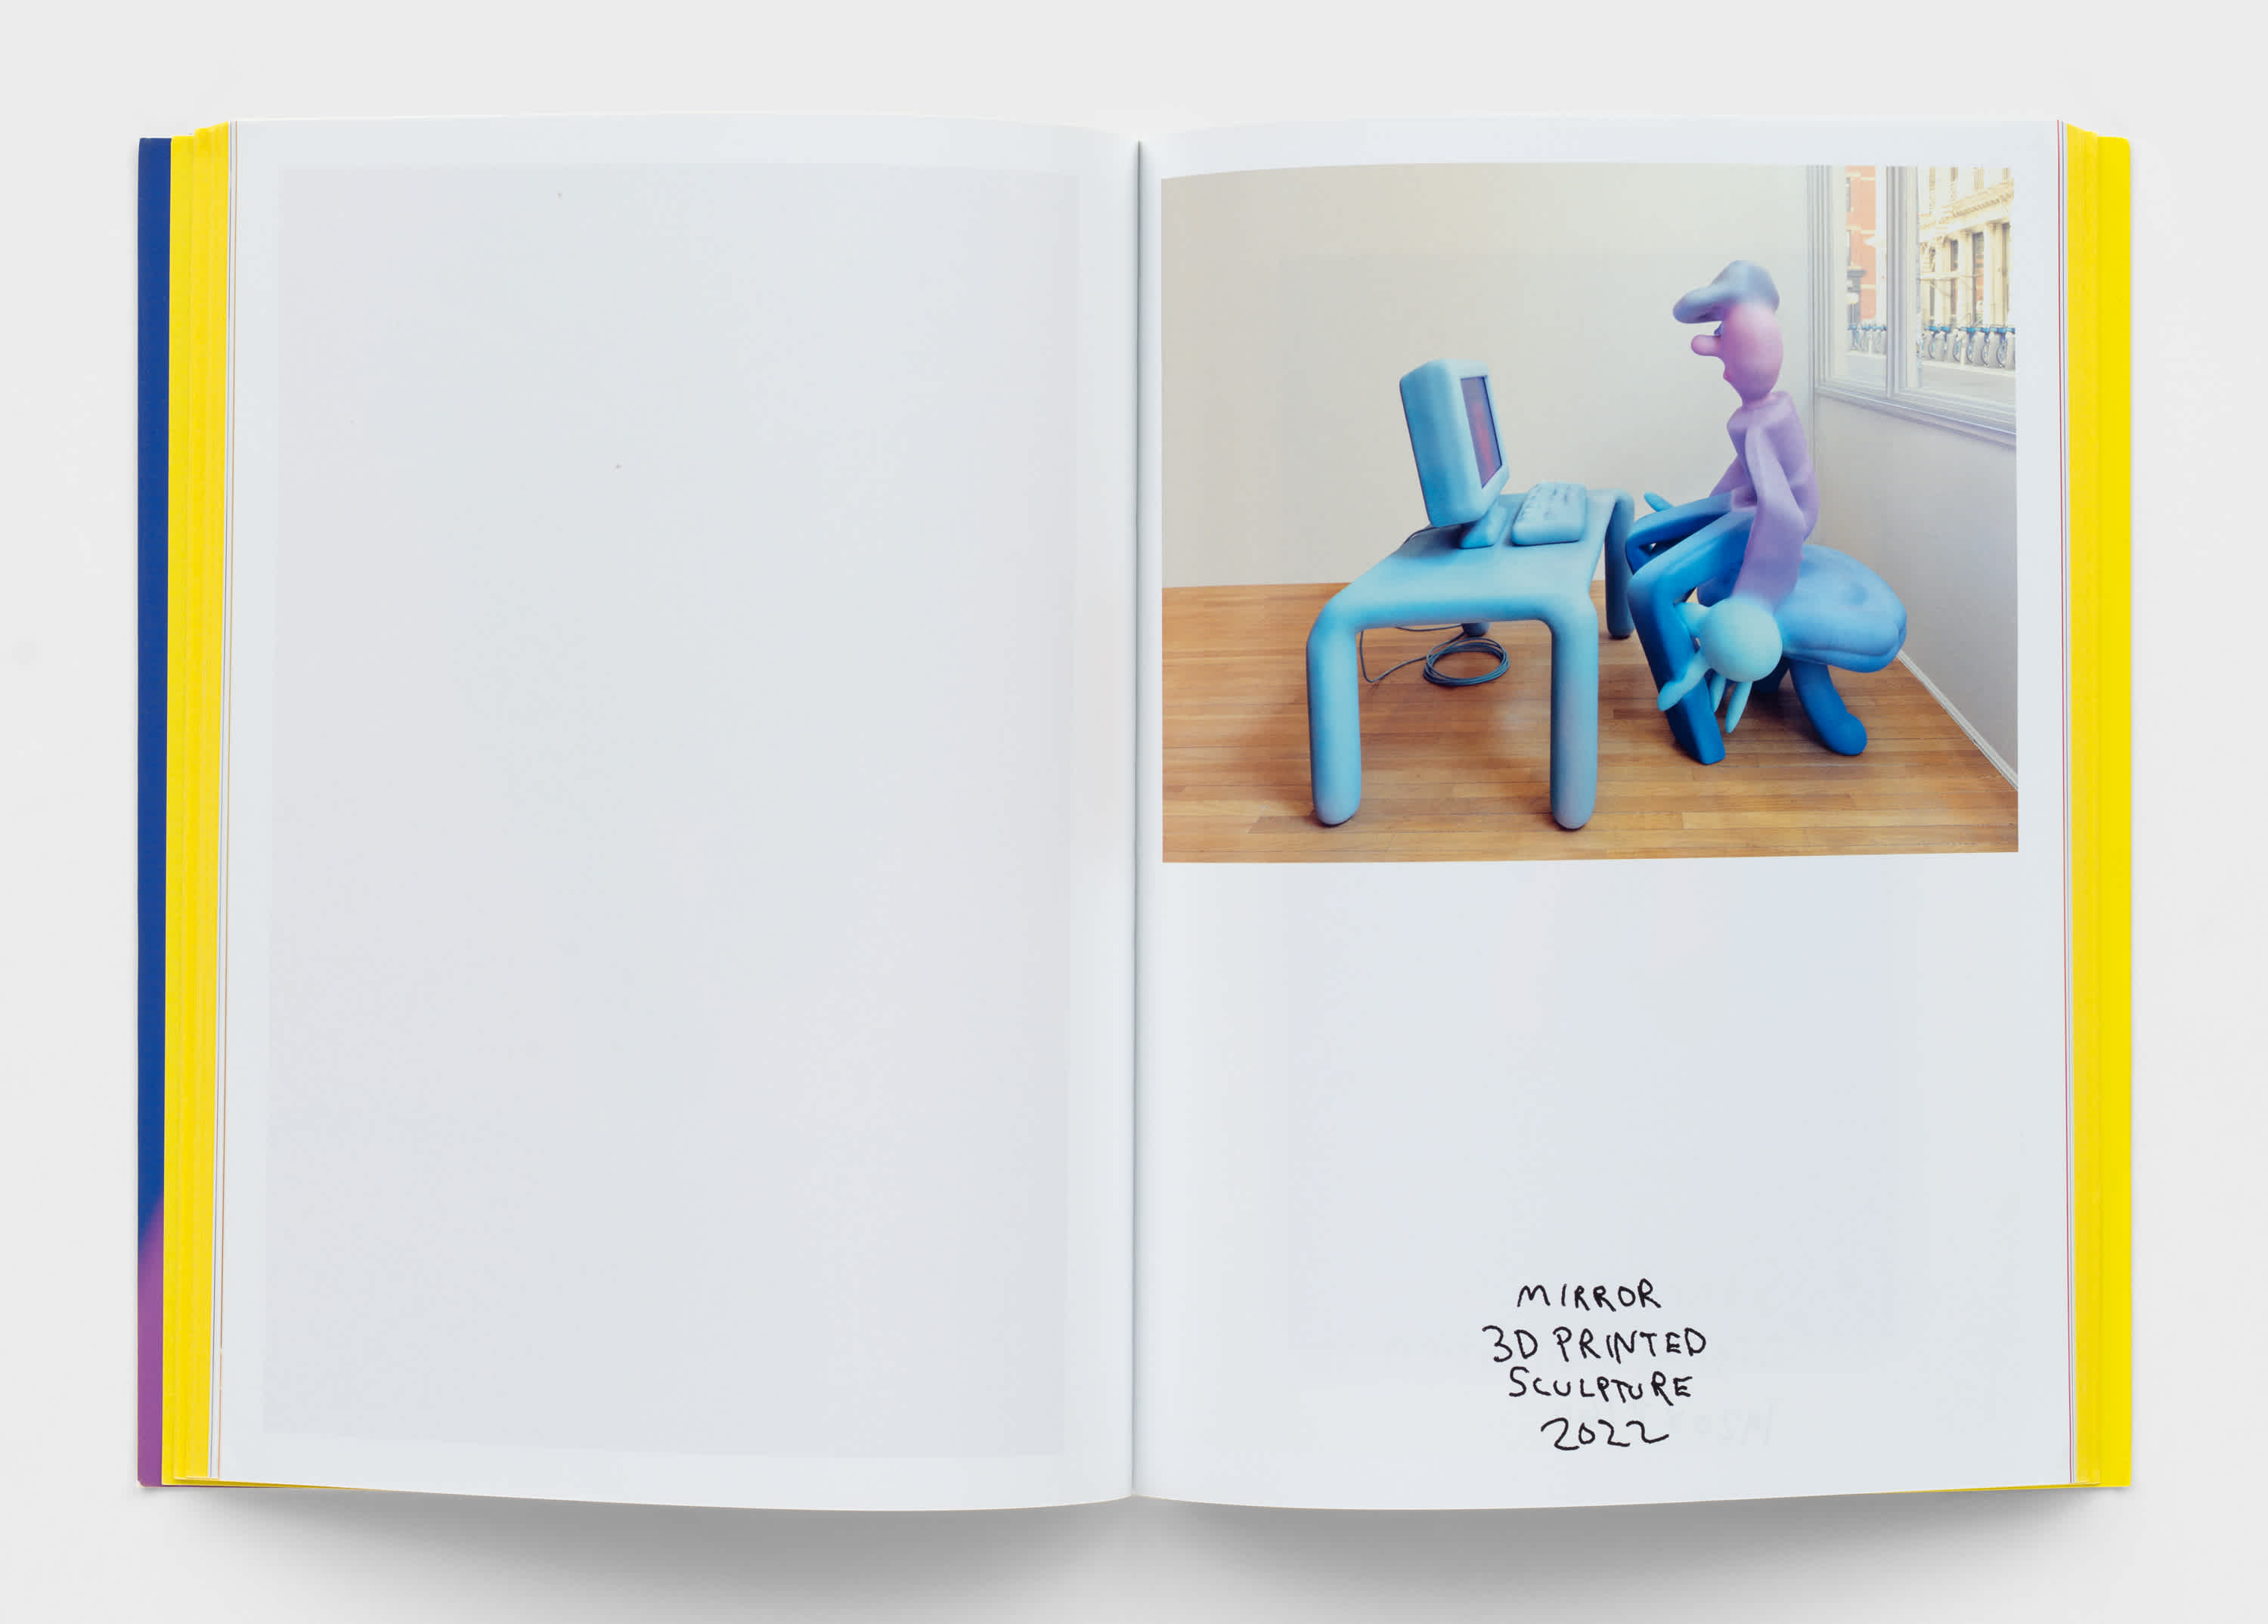 Open book with one image of a 3d printed sculpture on the top half of the right page. The sculpture is of a cartoon man with an enlarged hand, sitting at a desk. The sculpture information is scrawled in black penmanship at the bottom of the page.